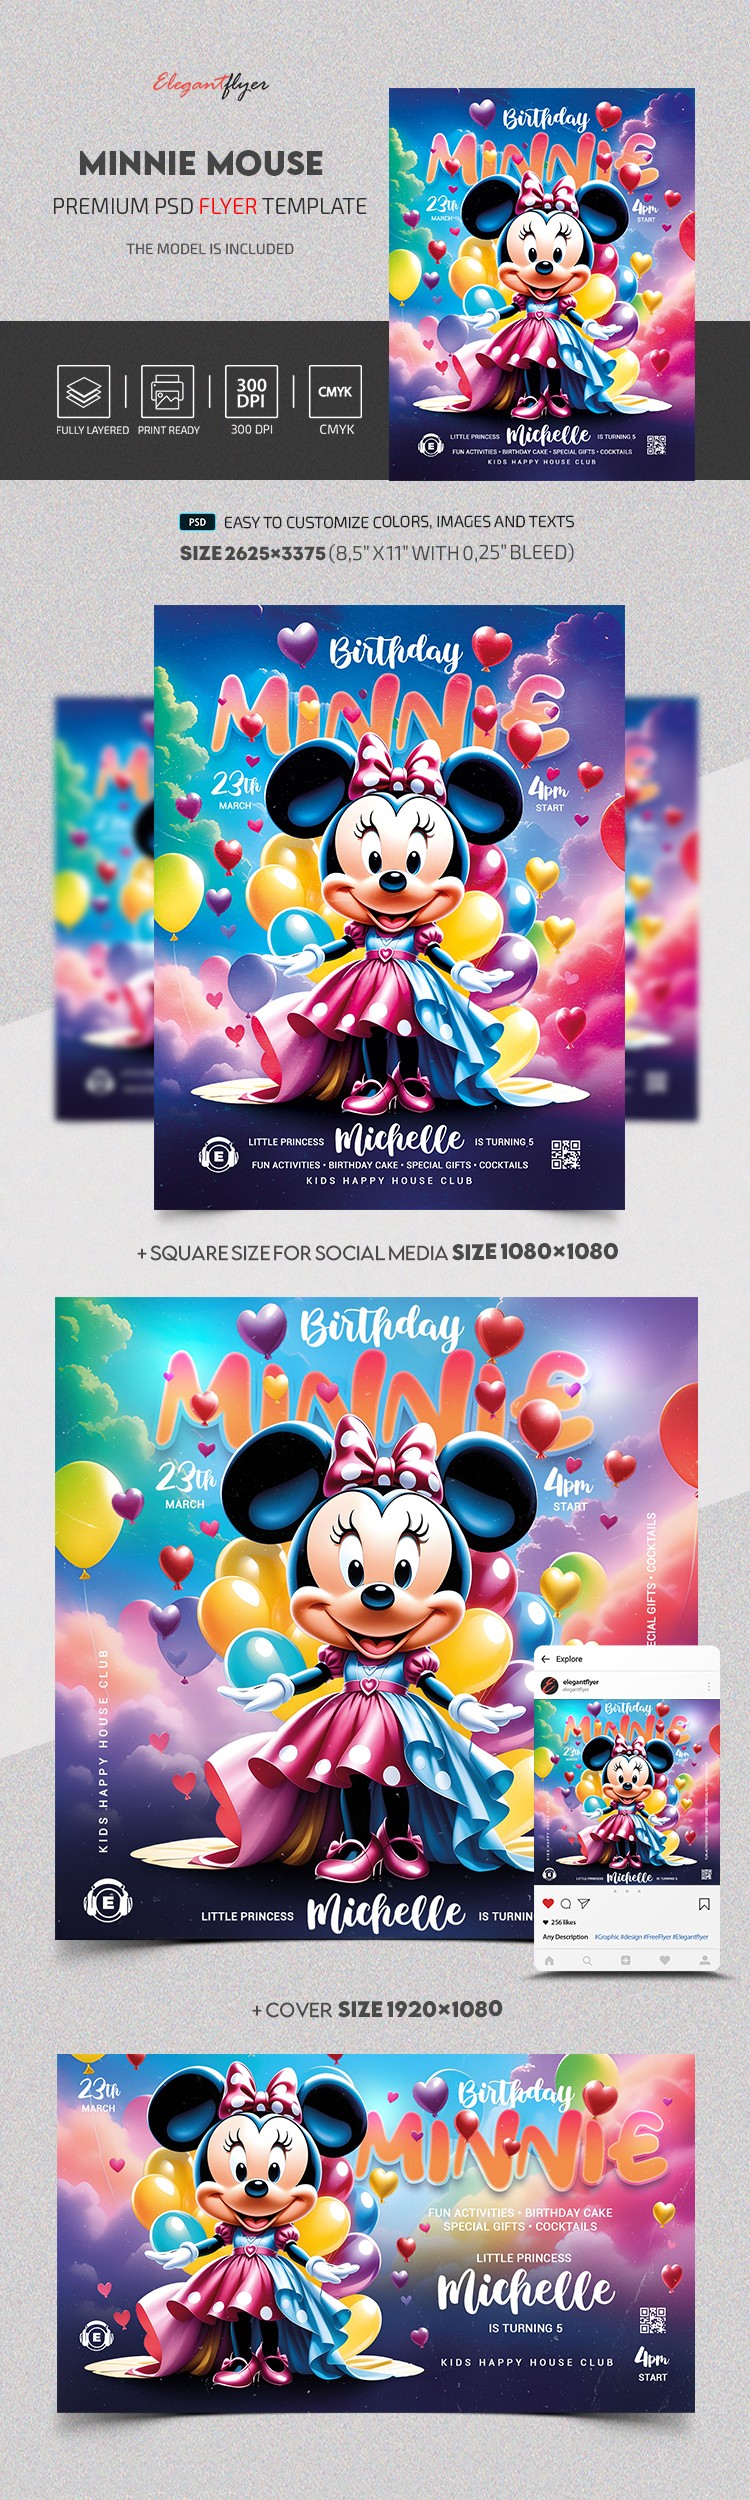 Minnie Mouse Compleanno by ElegantFlyer